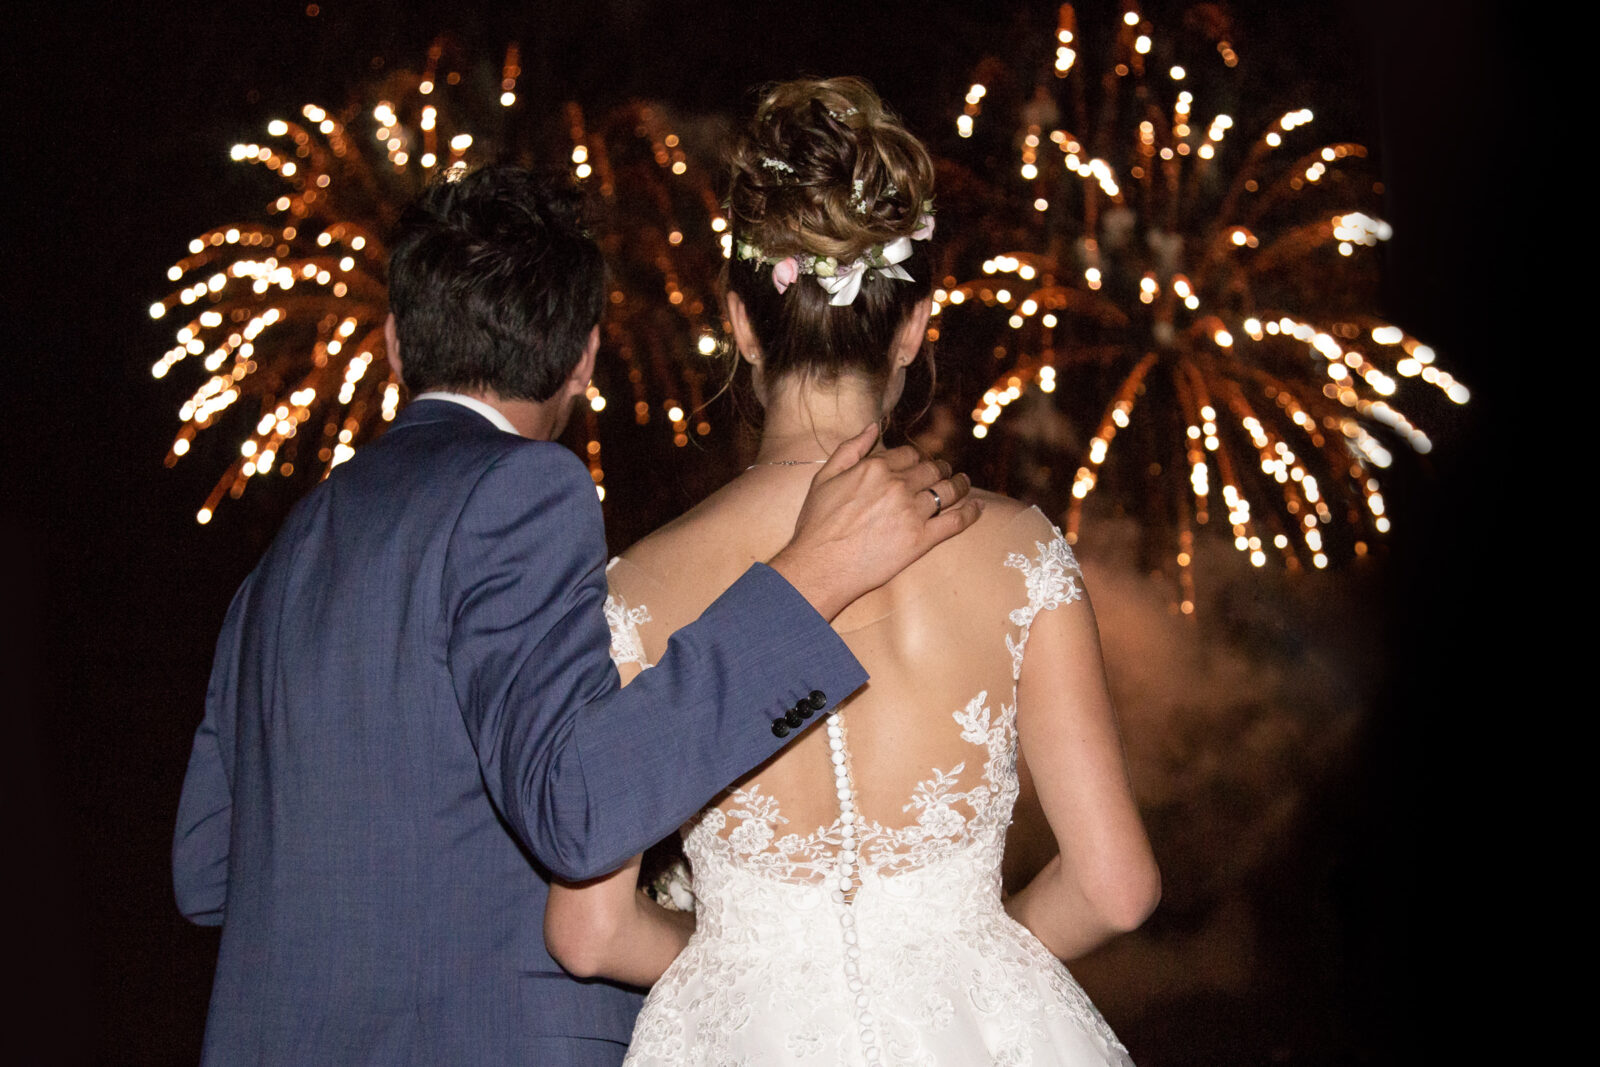 Wedding with fireworks in europe